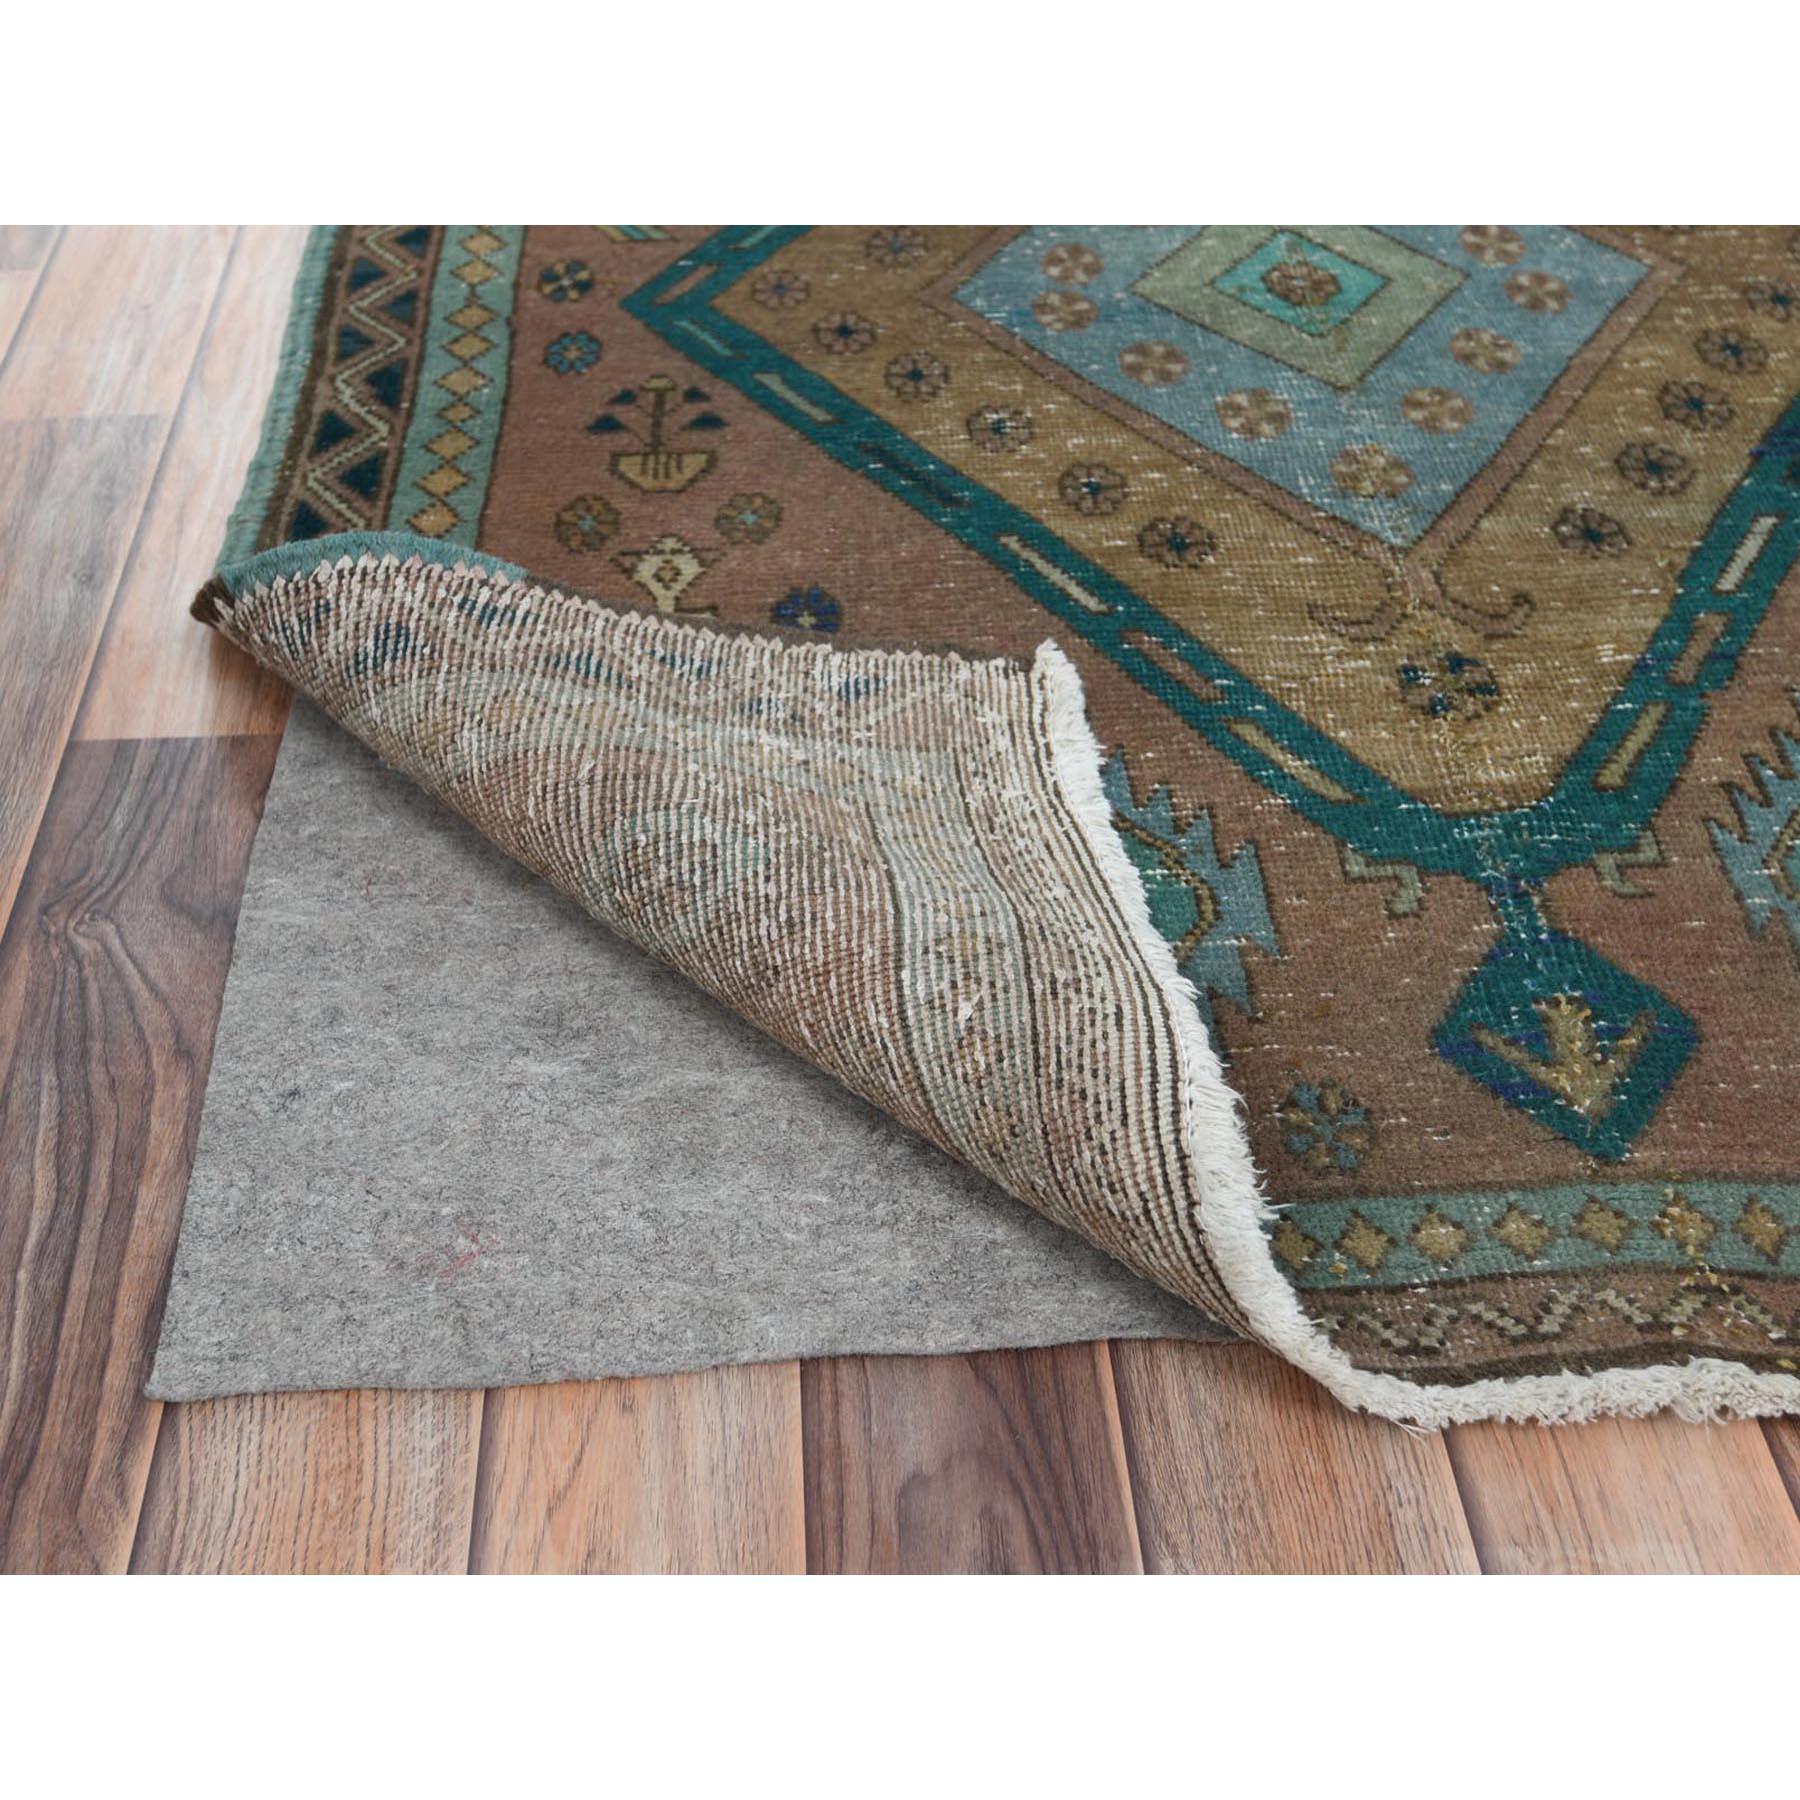 Medieval Sunset Colors, Vintage Northwest Persian, Hand Knotted Worn Wool Distressed Rug For Sale